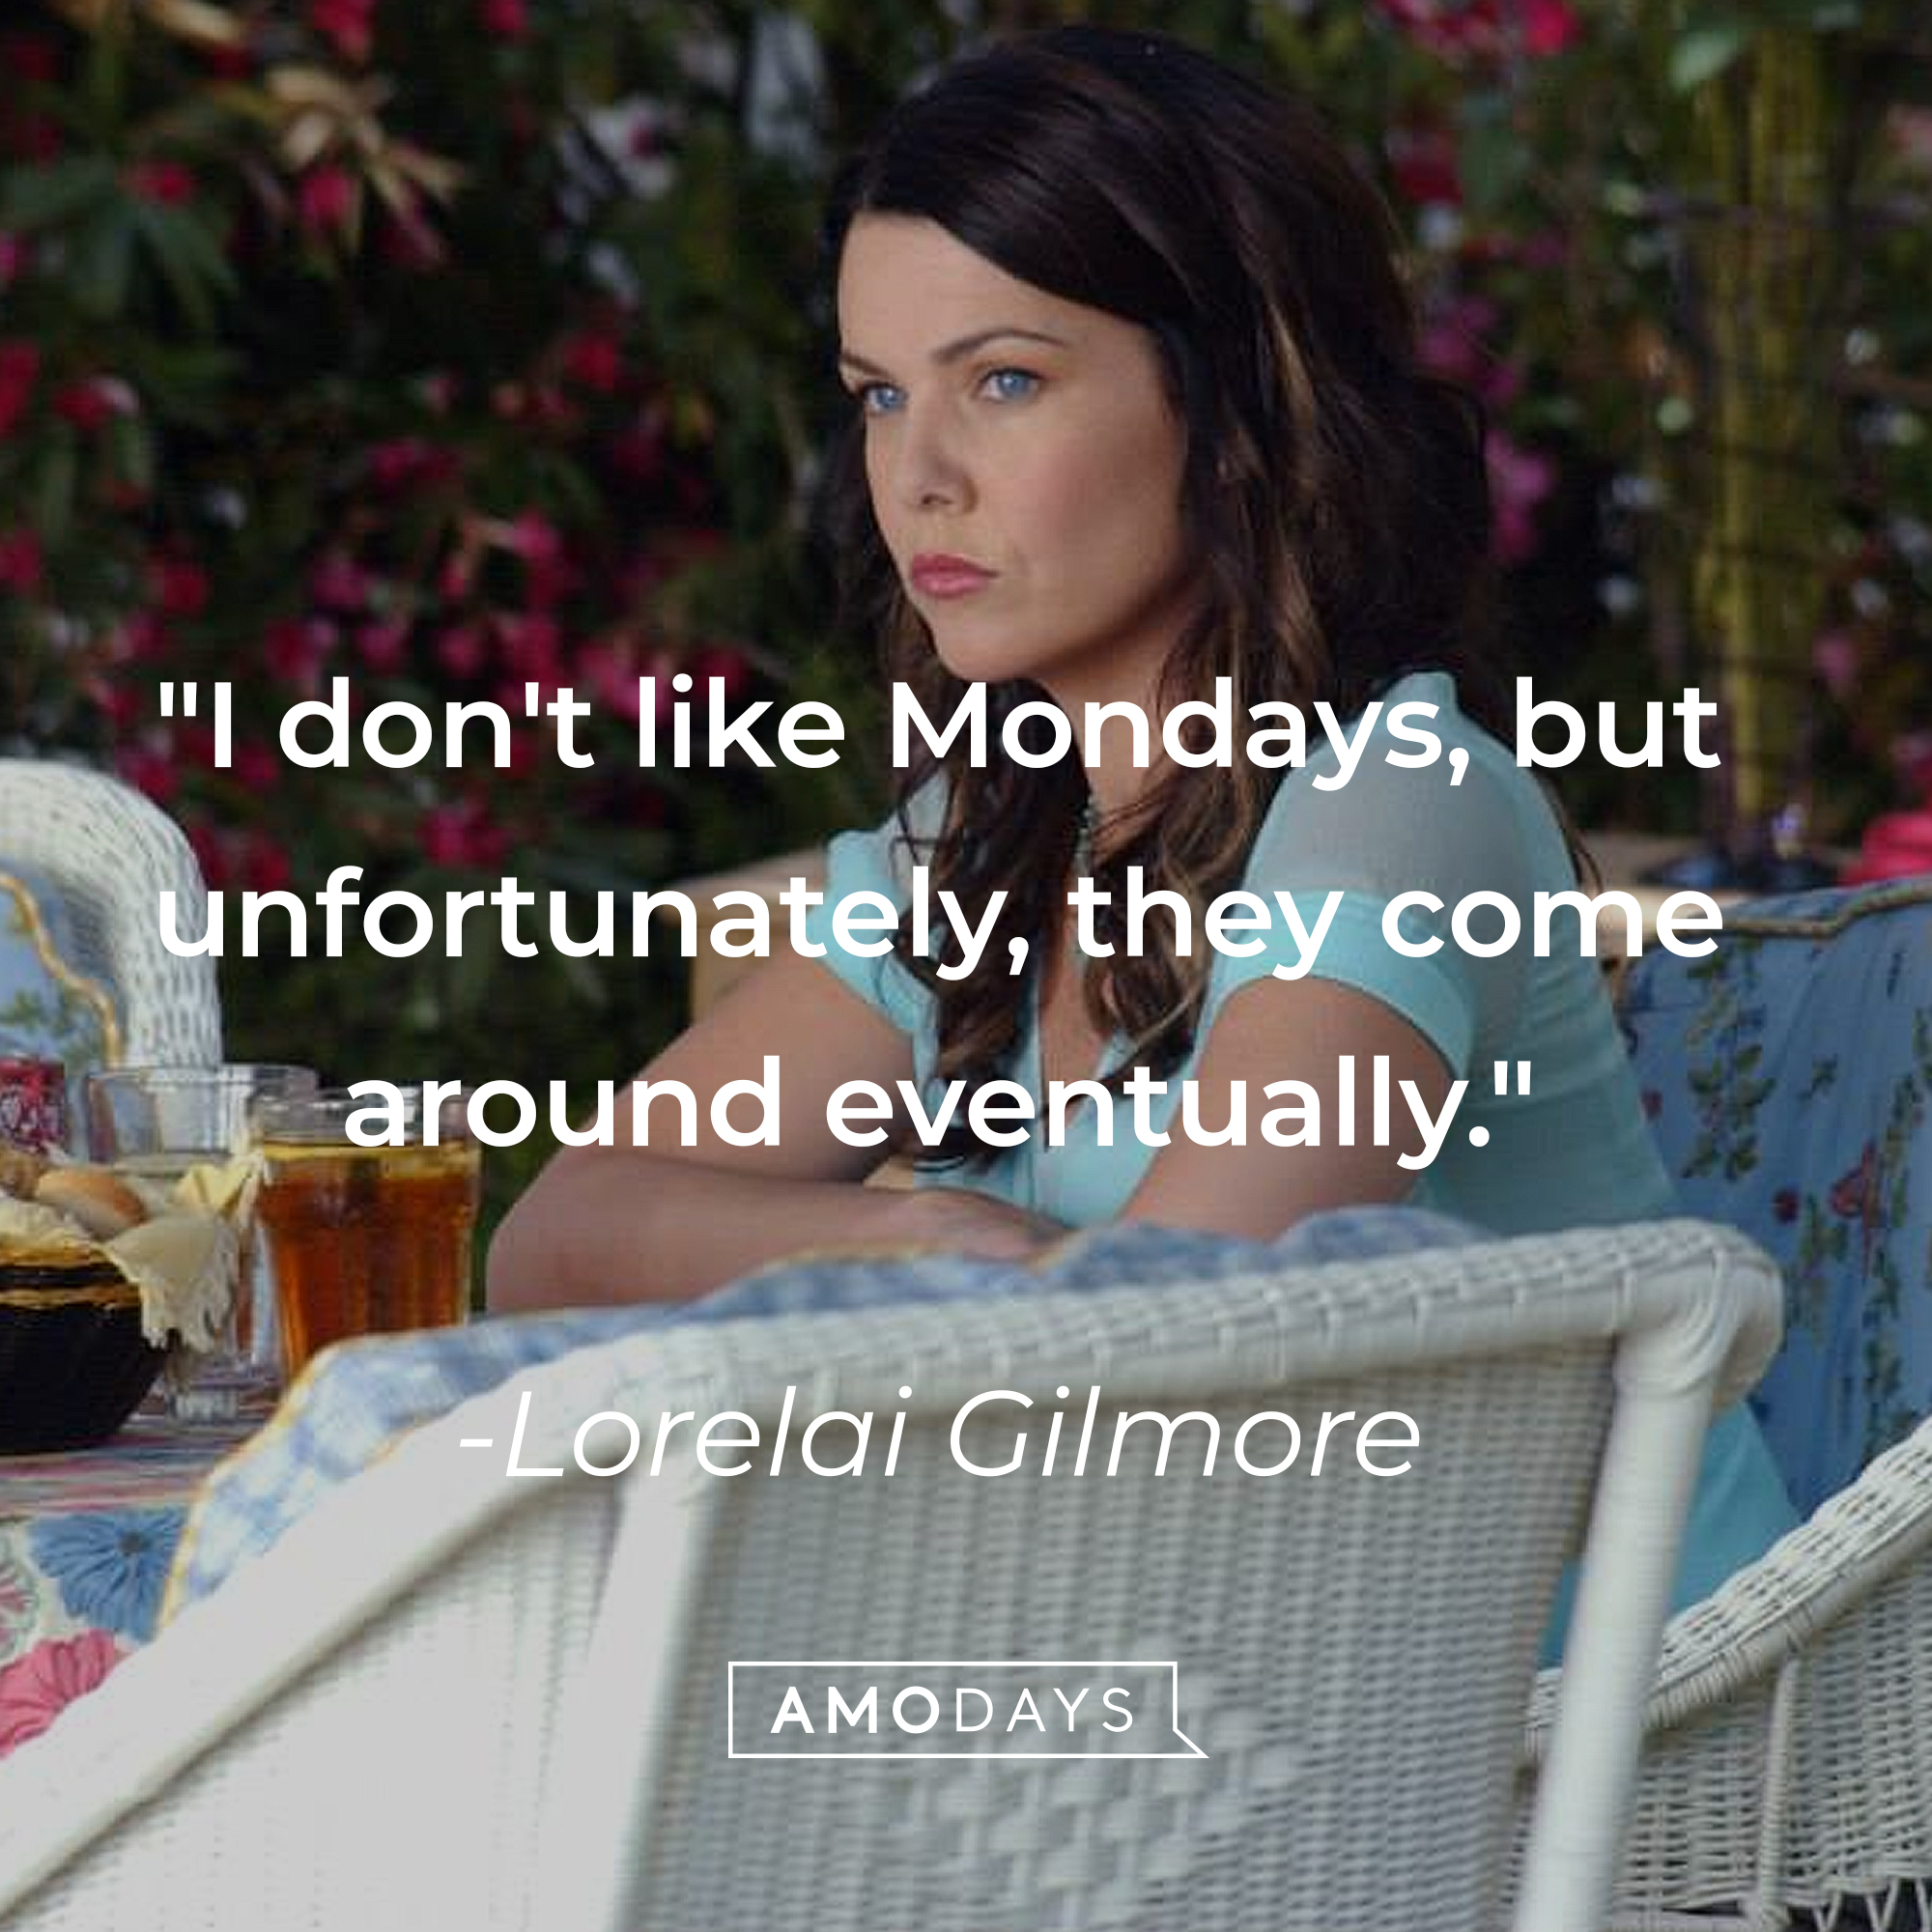 Lorelai Gilmore's quote: "I don't like Mondays, but unfortunately, they come around eventually." | Source: Facebook/GilmoreGirls